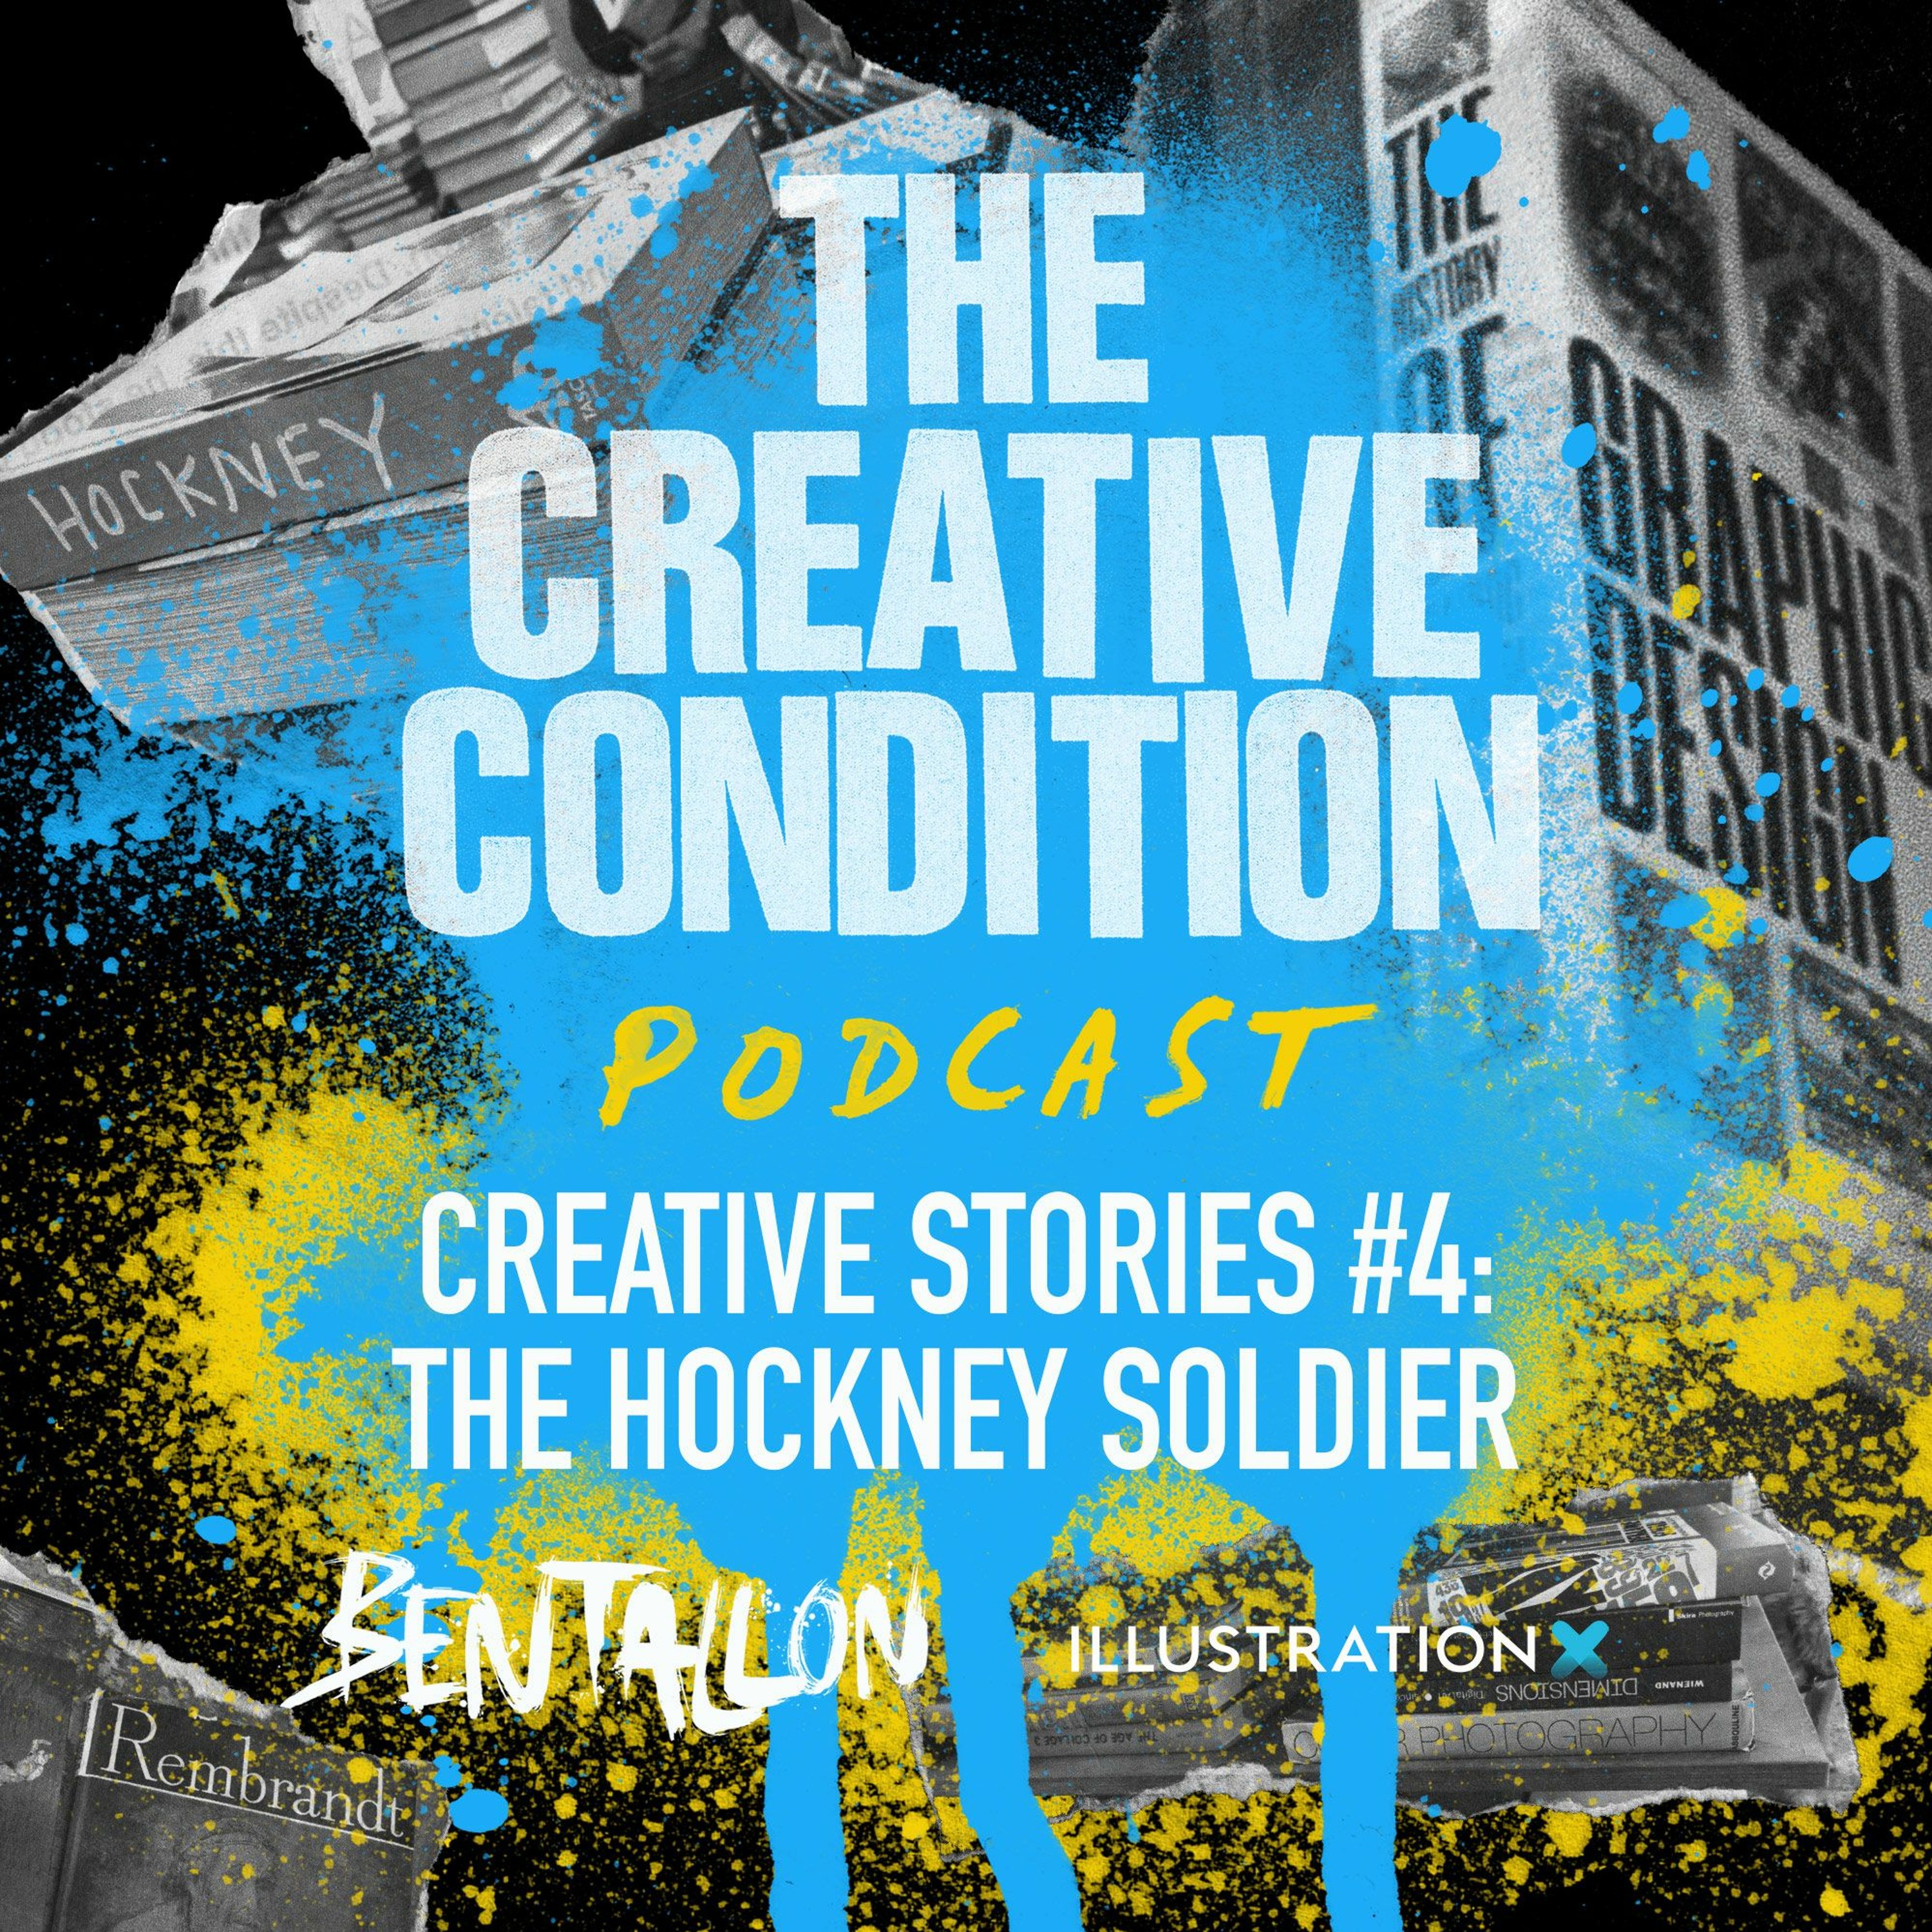 Creative stories #4: The Hockney Soldier. How art and design books tell our story